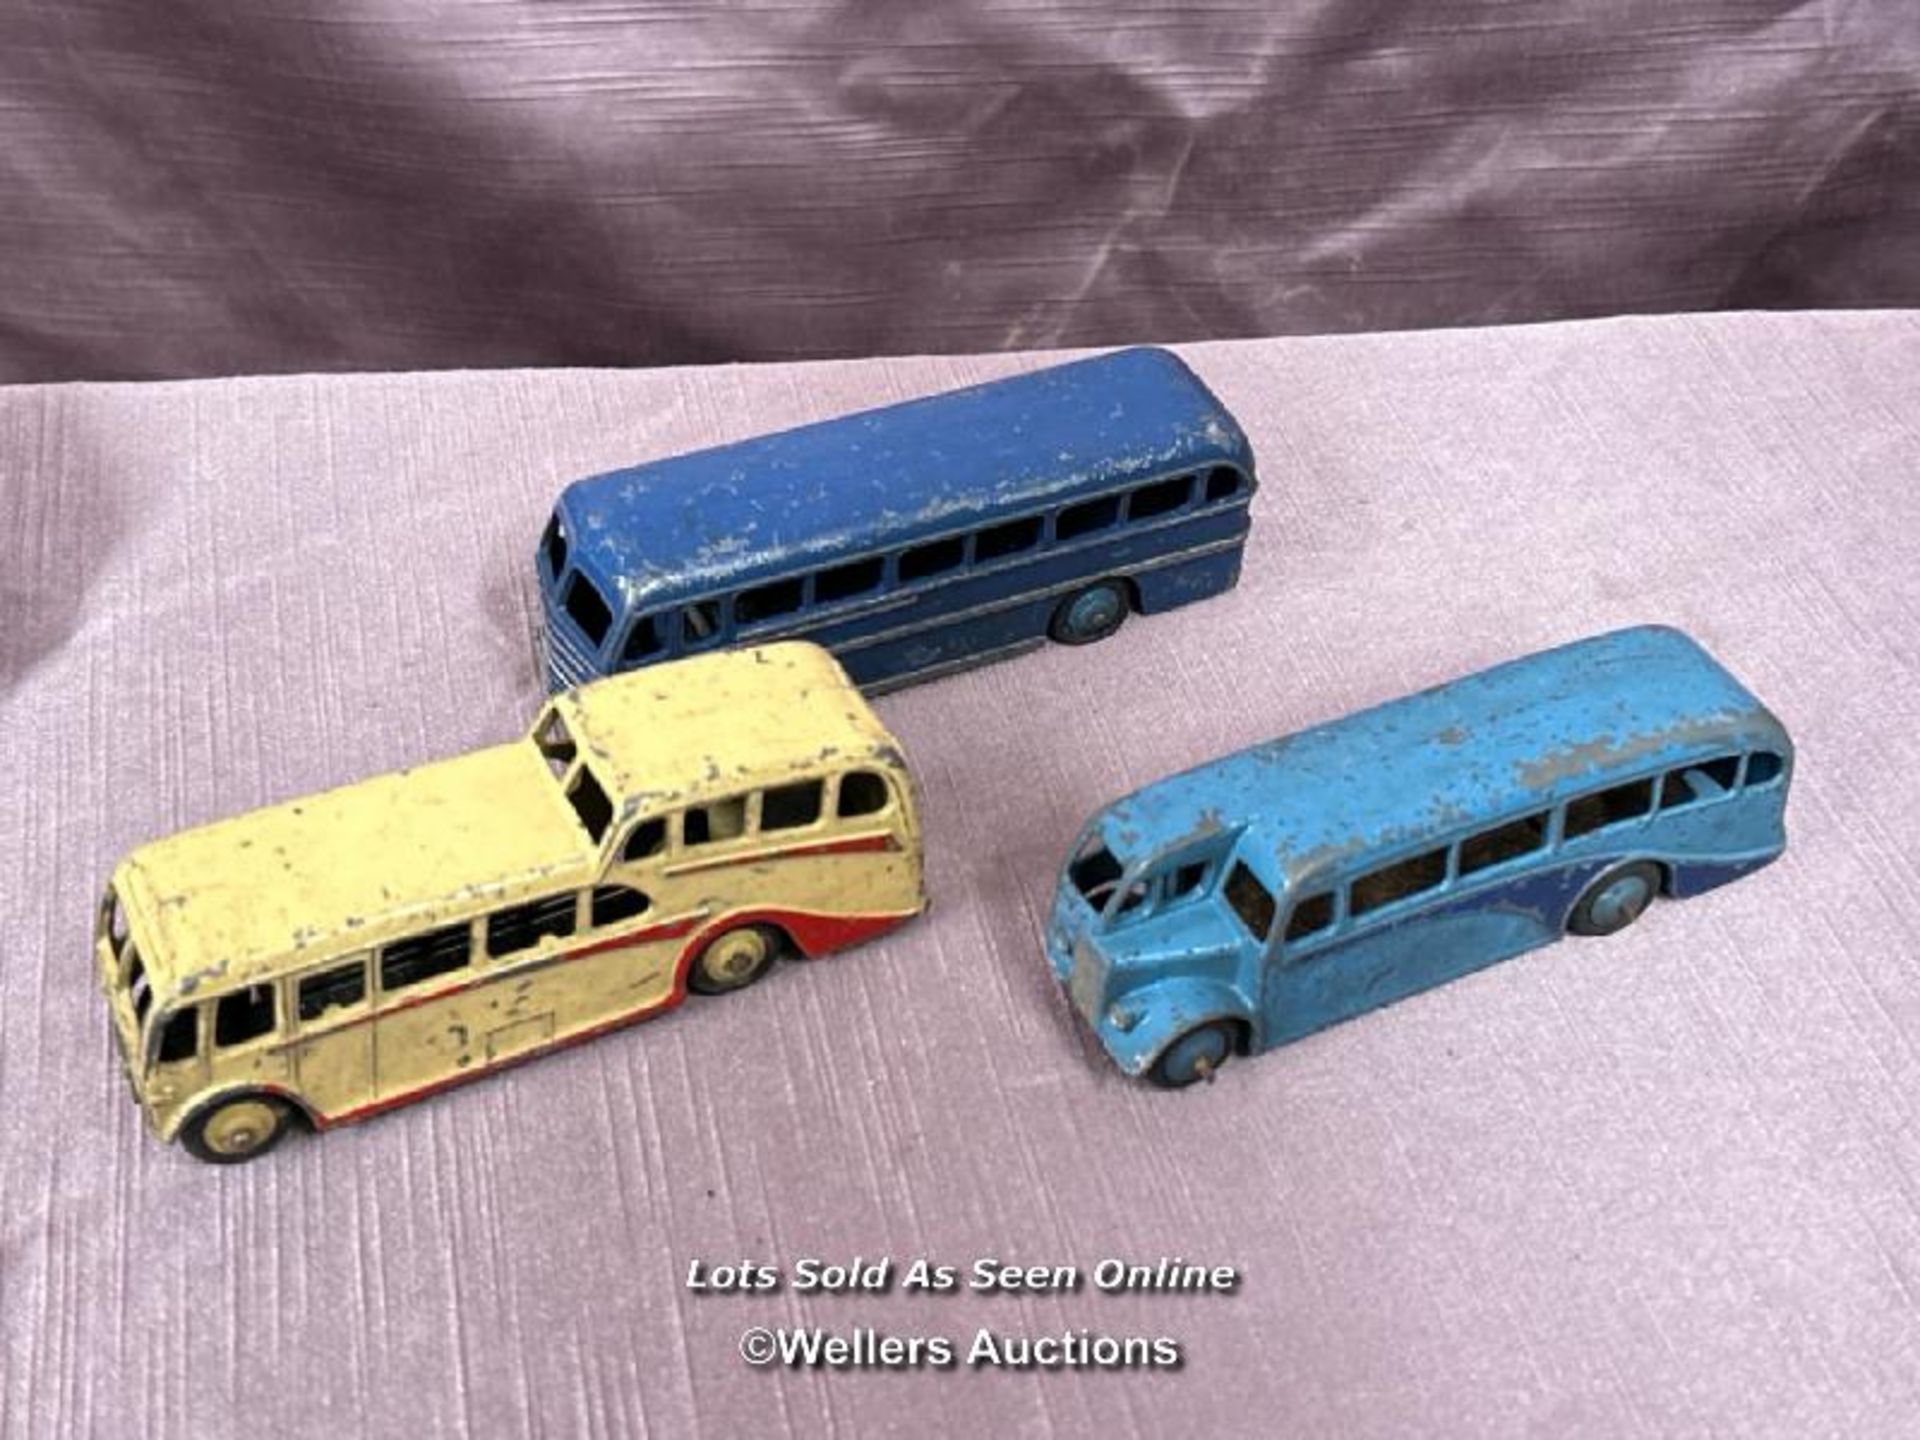 THREE DINKY DIE CAST COACHES INCLUDING OBSERVATION COACH AND THE LEYLAND ROYAL TIGER - Image 7 of 7